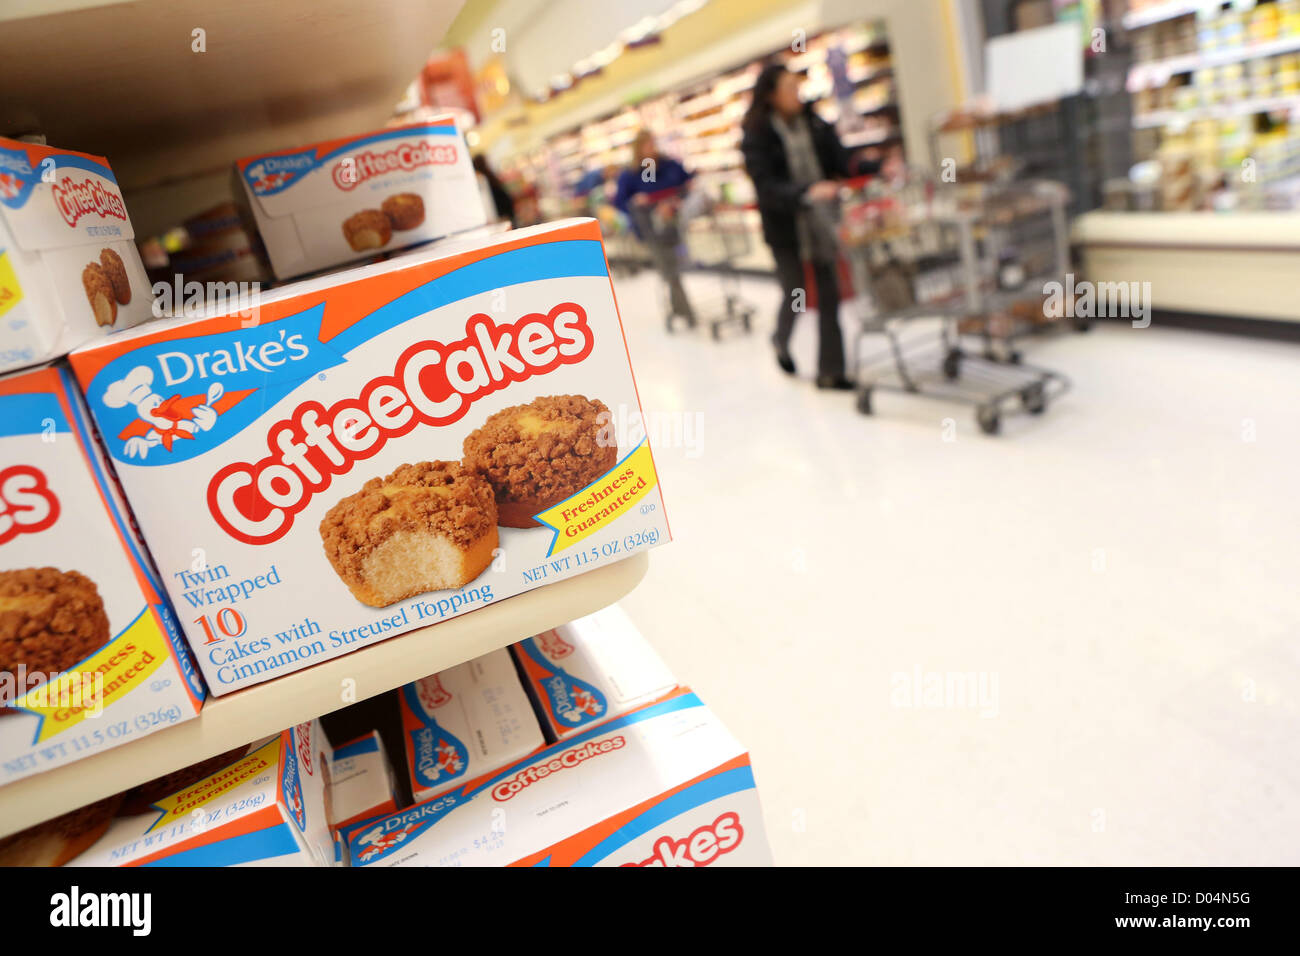 Nov. 16, 2012 - Malden, Massachusetts, U.S - Drakes Coffee Cakes are seen on the supermarket shelf in Malden, Massachusetts on Friday, November 16, 2012. Hostess Brands Inc. announced that it will shut down operations and no longer produce some of Americas most iconic snacks. (Credit Image: © Nicolaus Czarnecki/ZUMAPRESS.com) Stock Photo